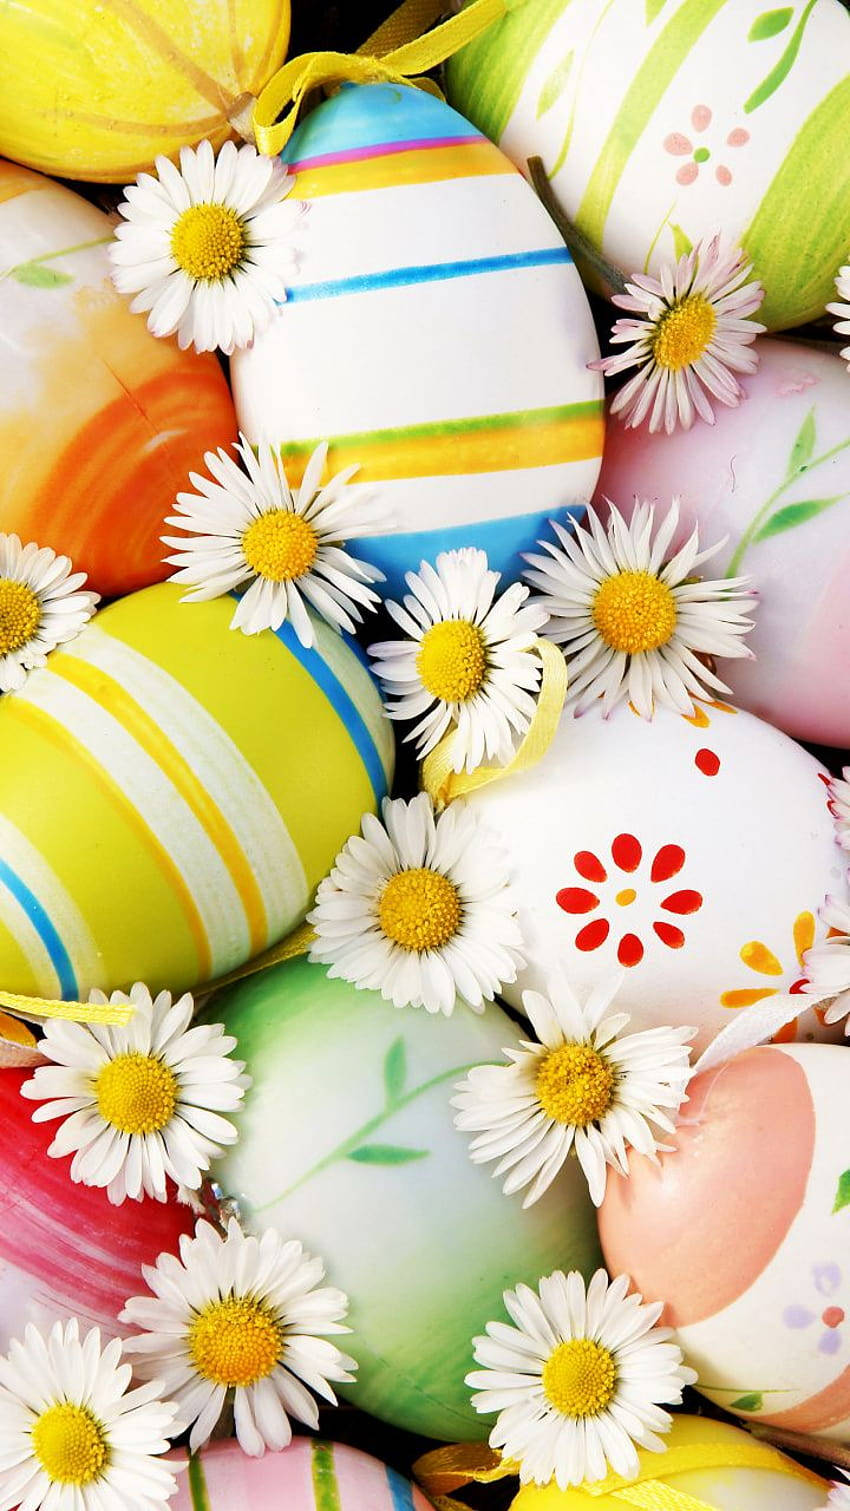 Easter Eggs With Daisies And Flowers Wallpaper